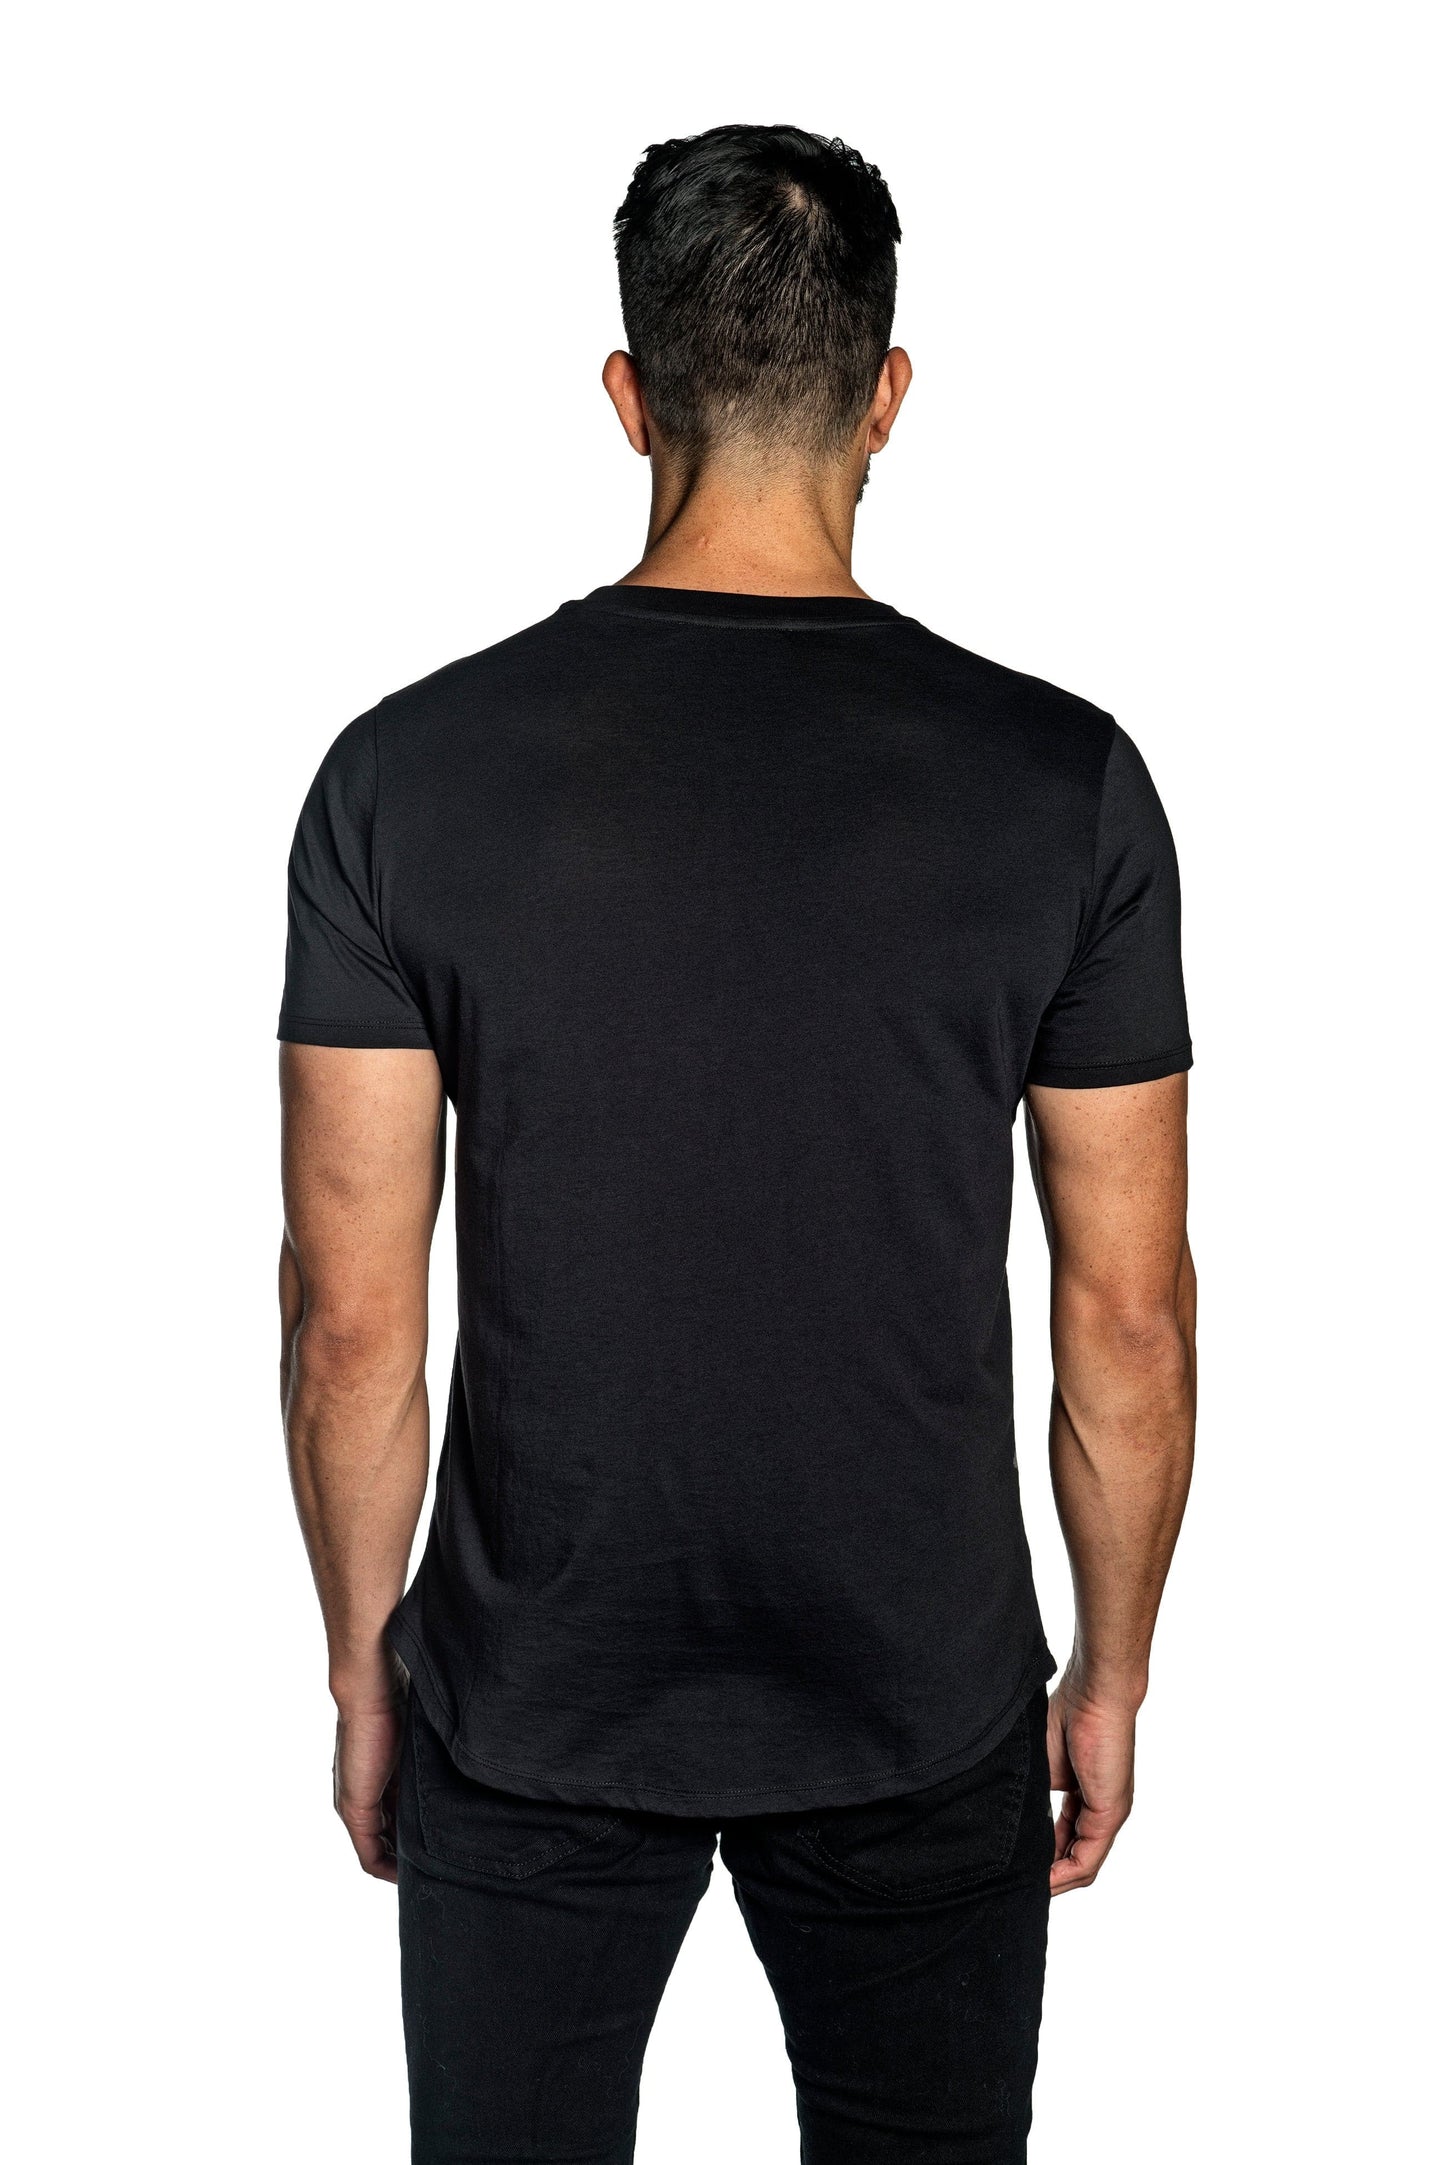 Black Mens Tee With Star Embroidery TEE-29.